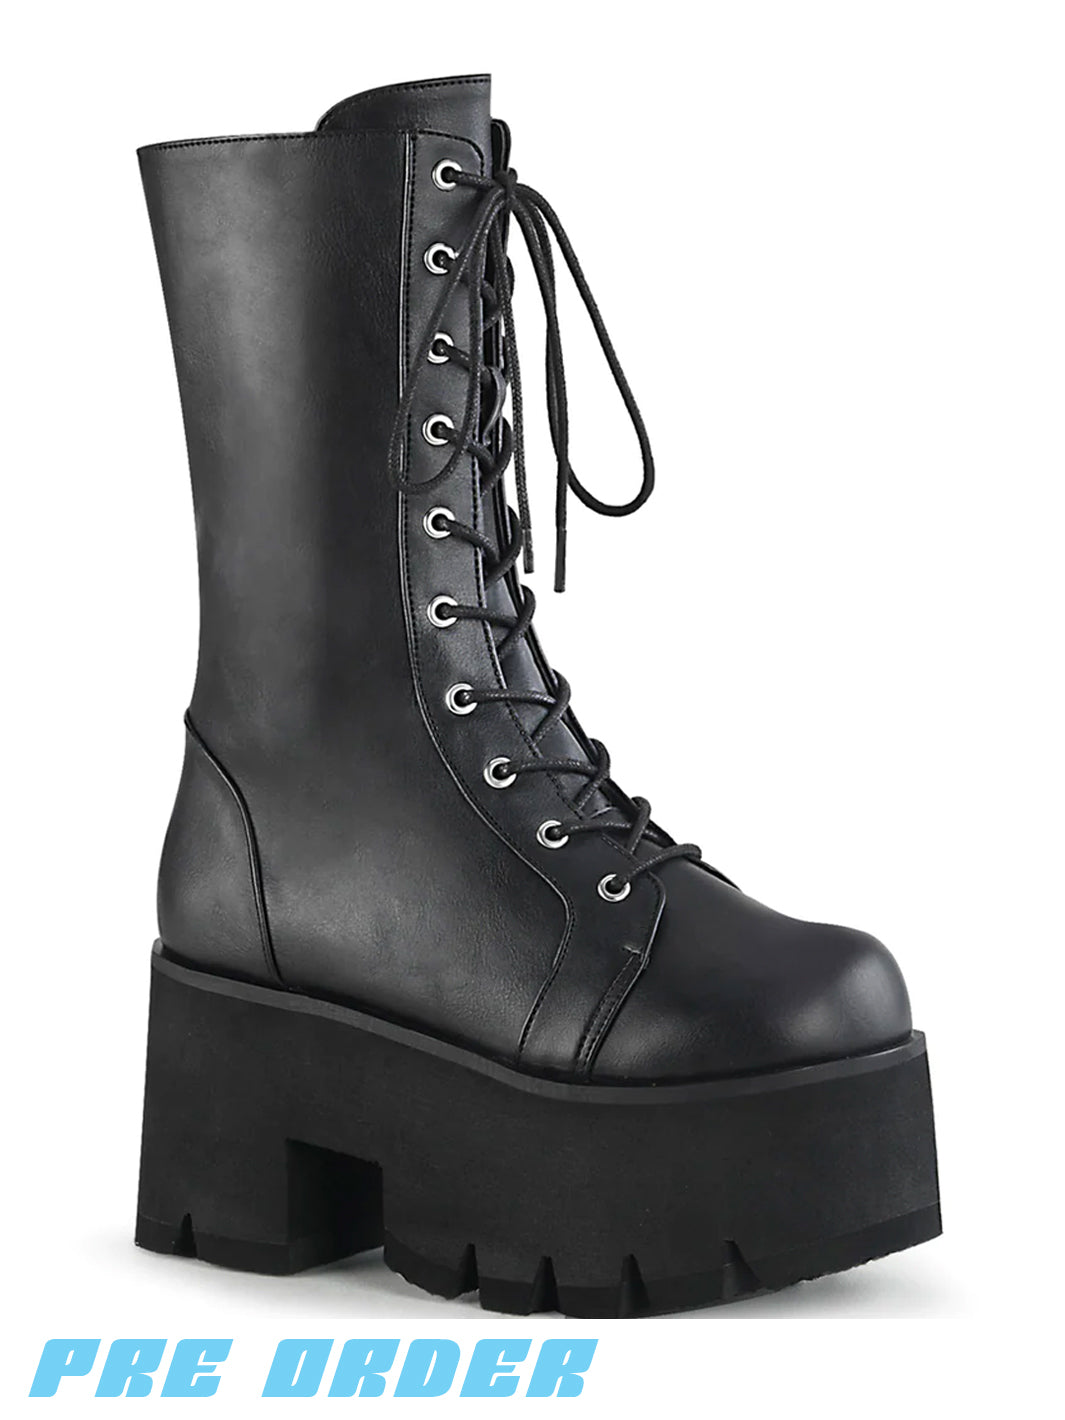 DEMONIA ASHES-105 BOOTS ✰ PRE ORDER ✰